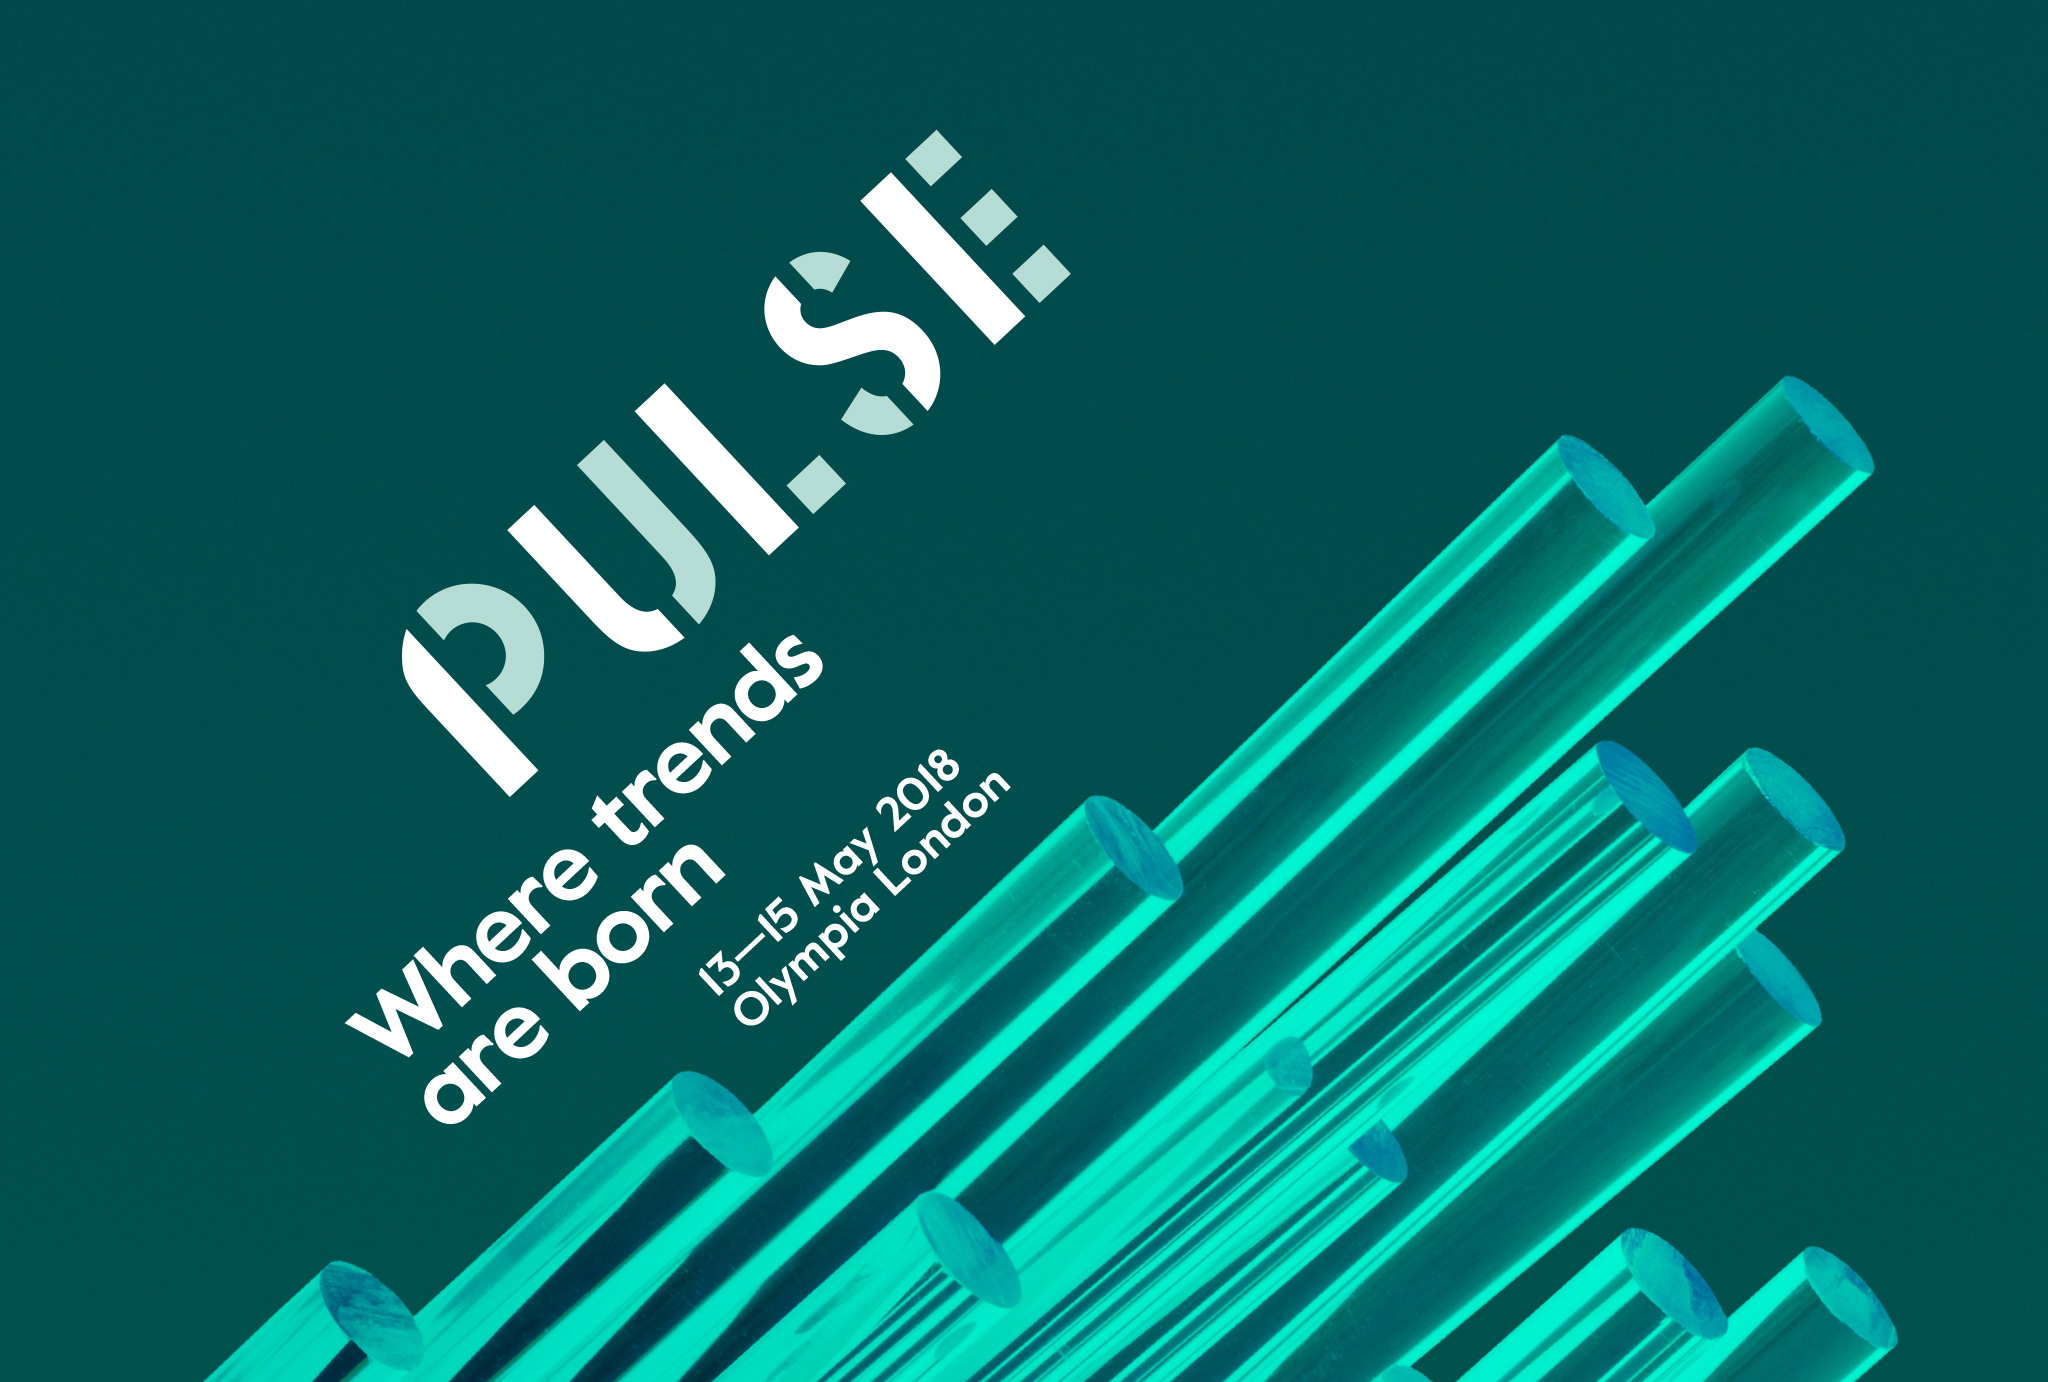 dark turquoise background with crystal-like glowing rods and ‘PULSE’ ‘Where trends are born’ written above in white